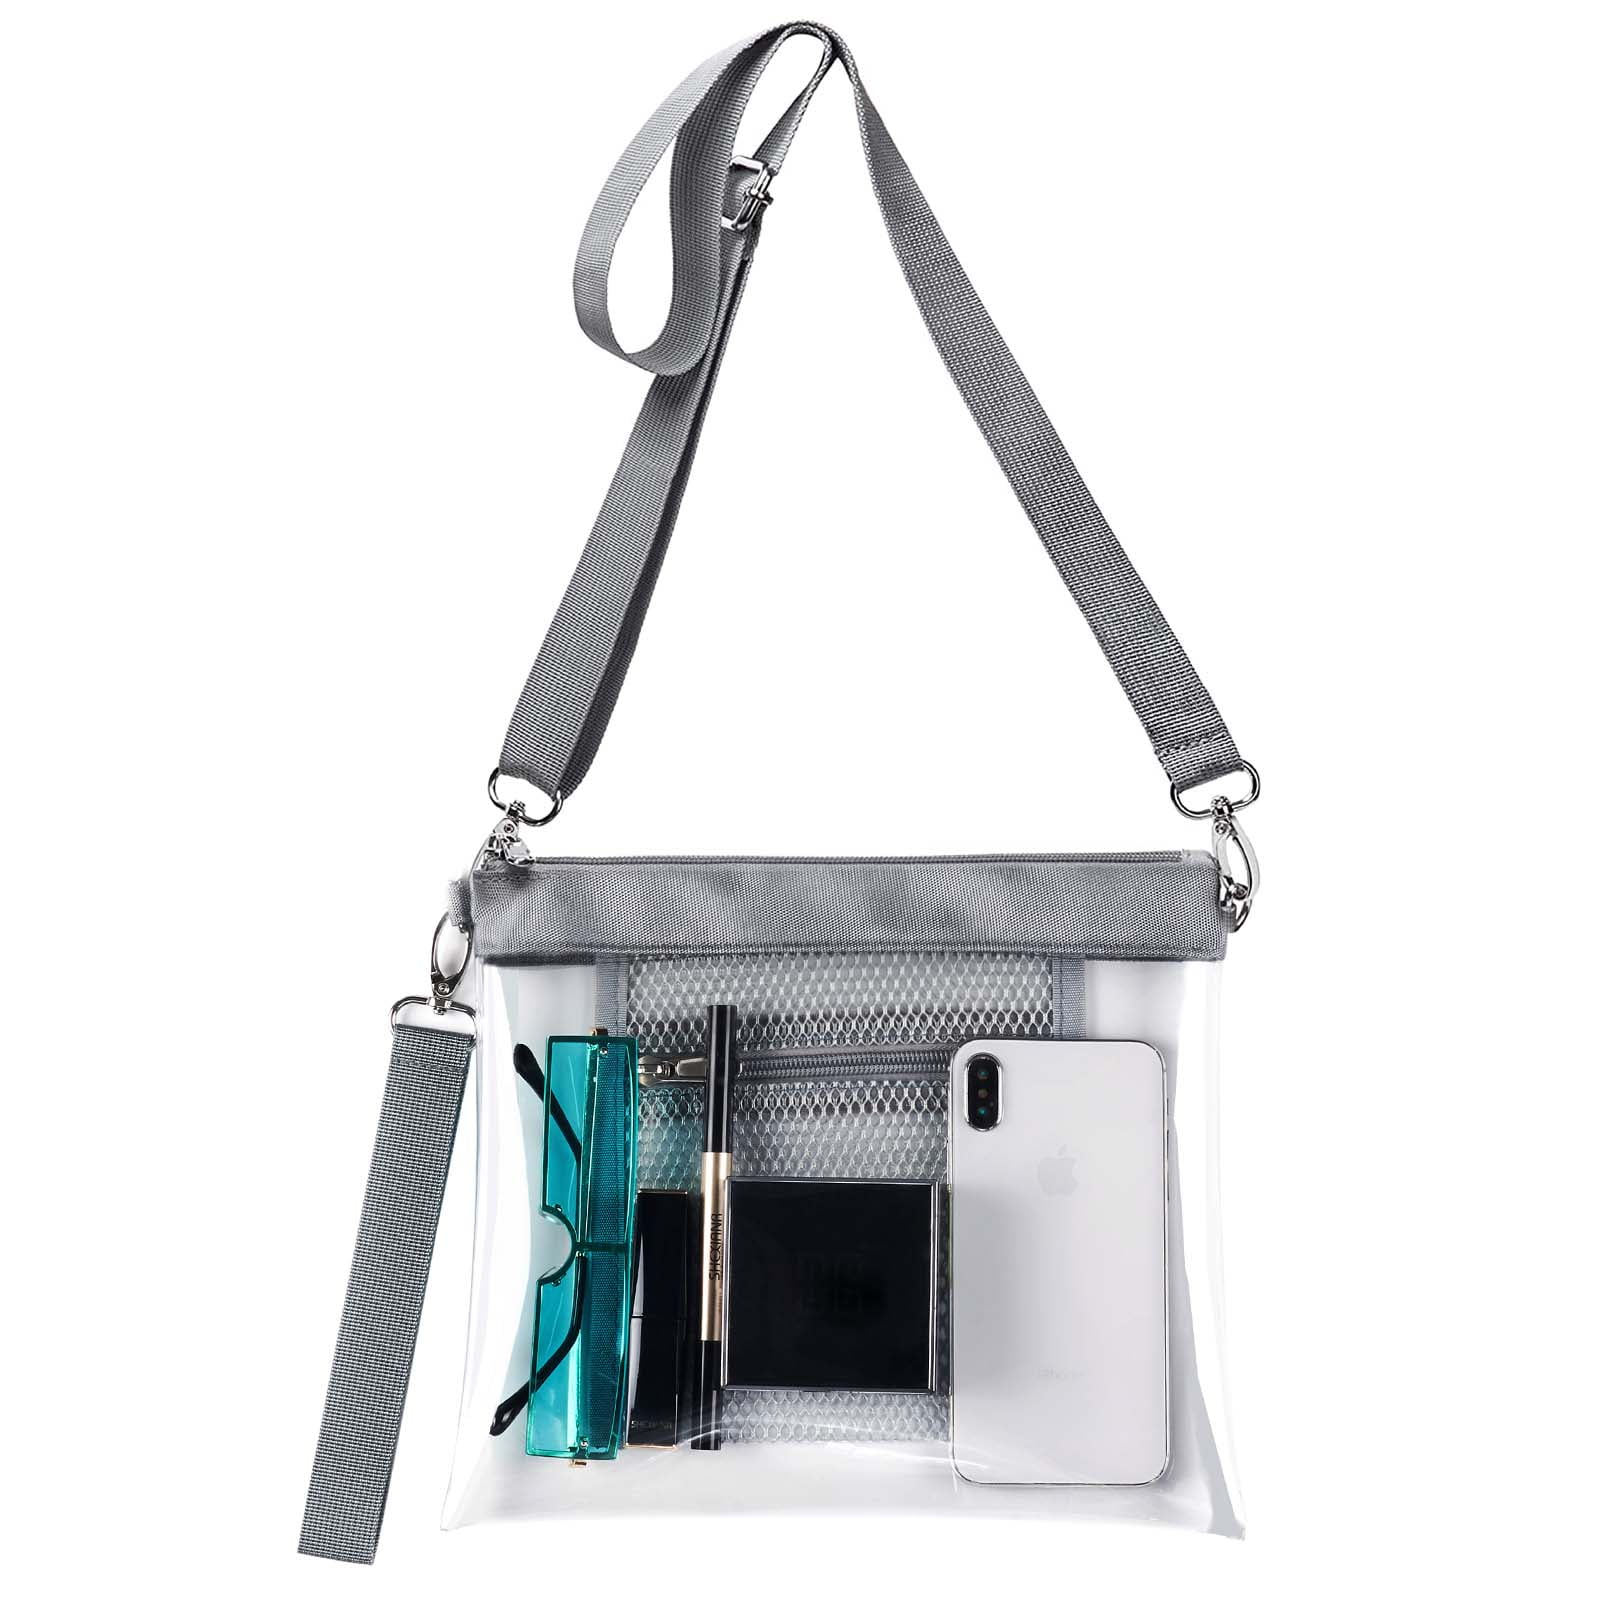 Vorspack Clear Bag Stadium Approved - PVC Clear Purse Clear Crossbody Bag  with Front Pocket for Concerts Sports Festivals